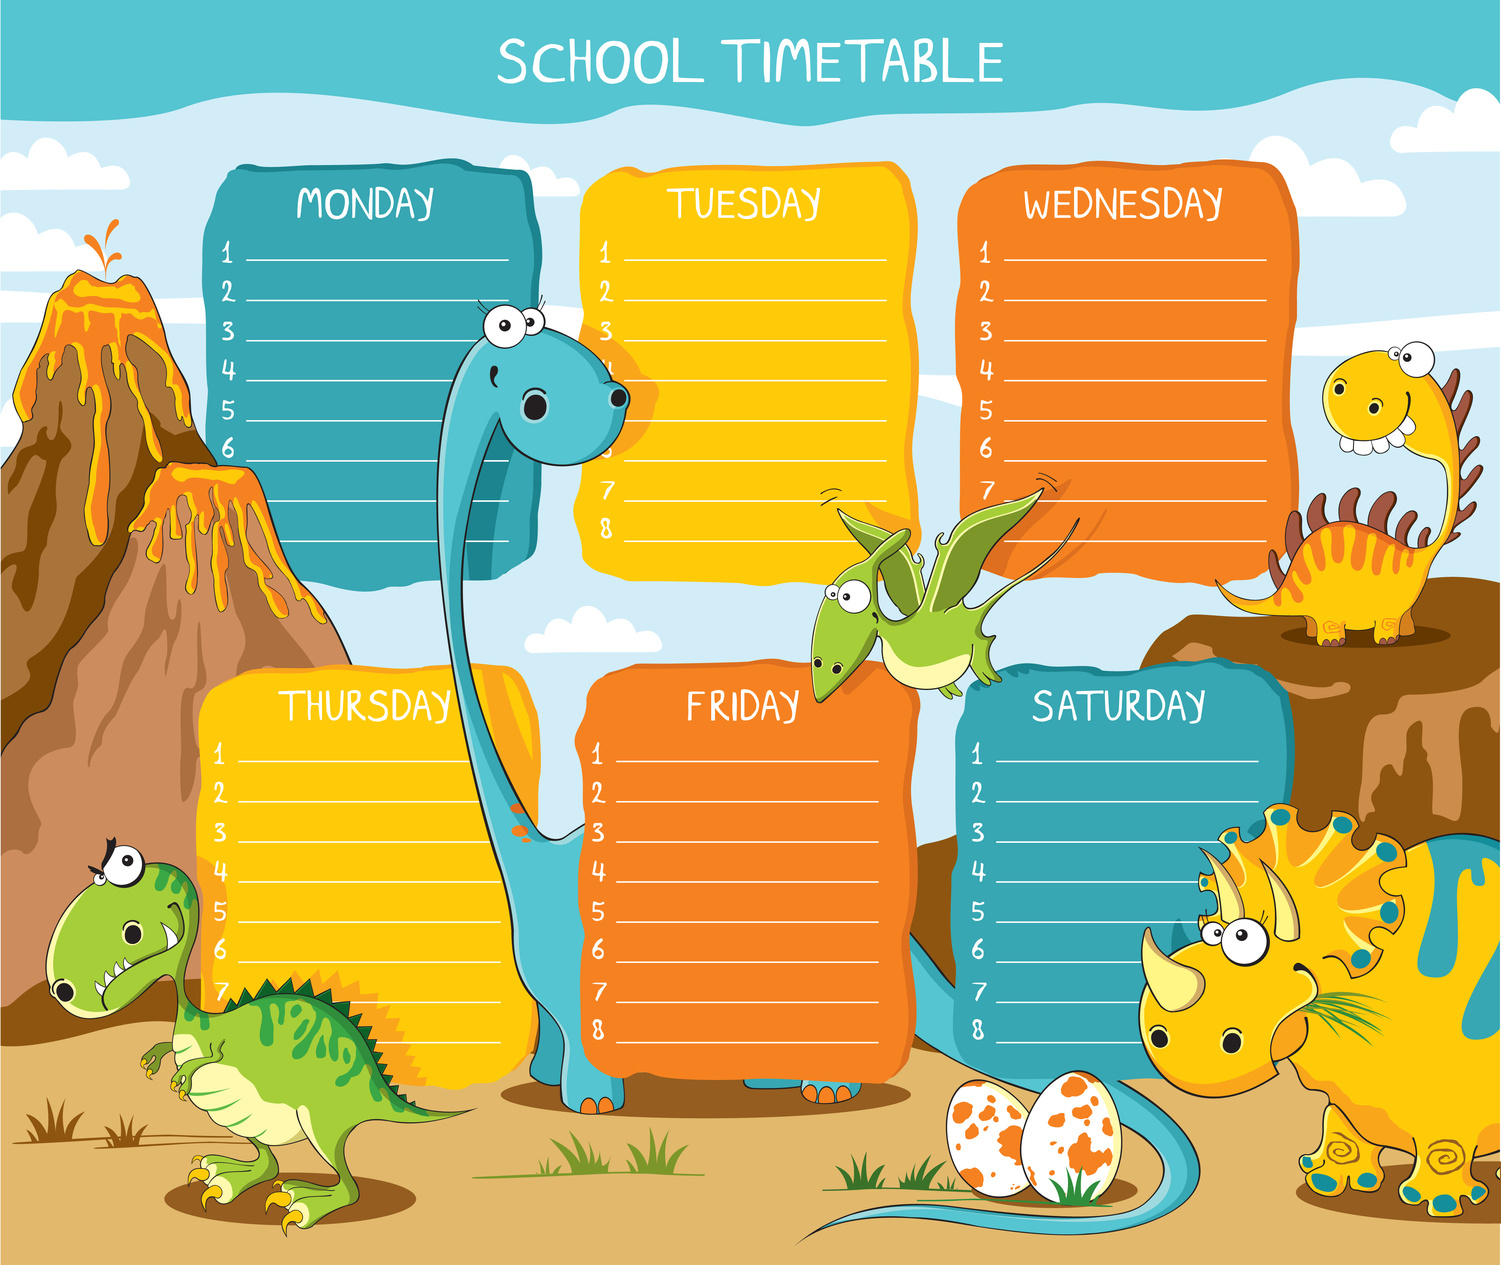 A Funny School Timetable Poster